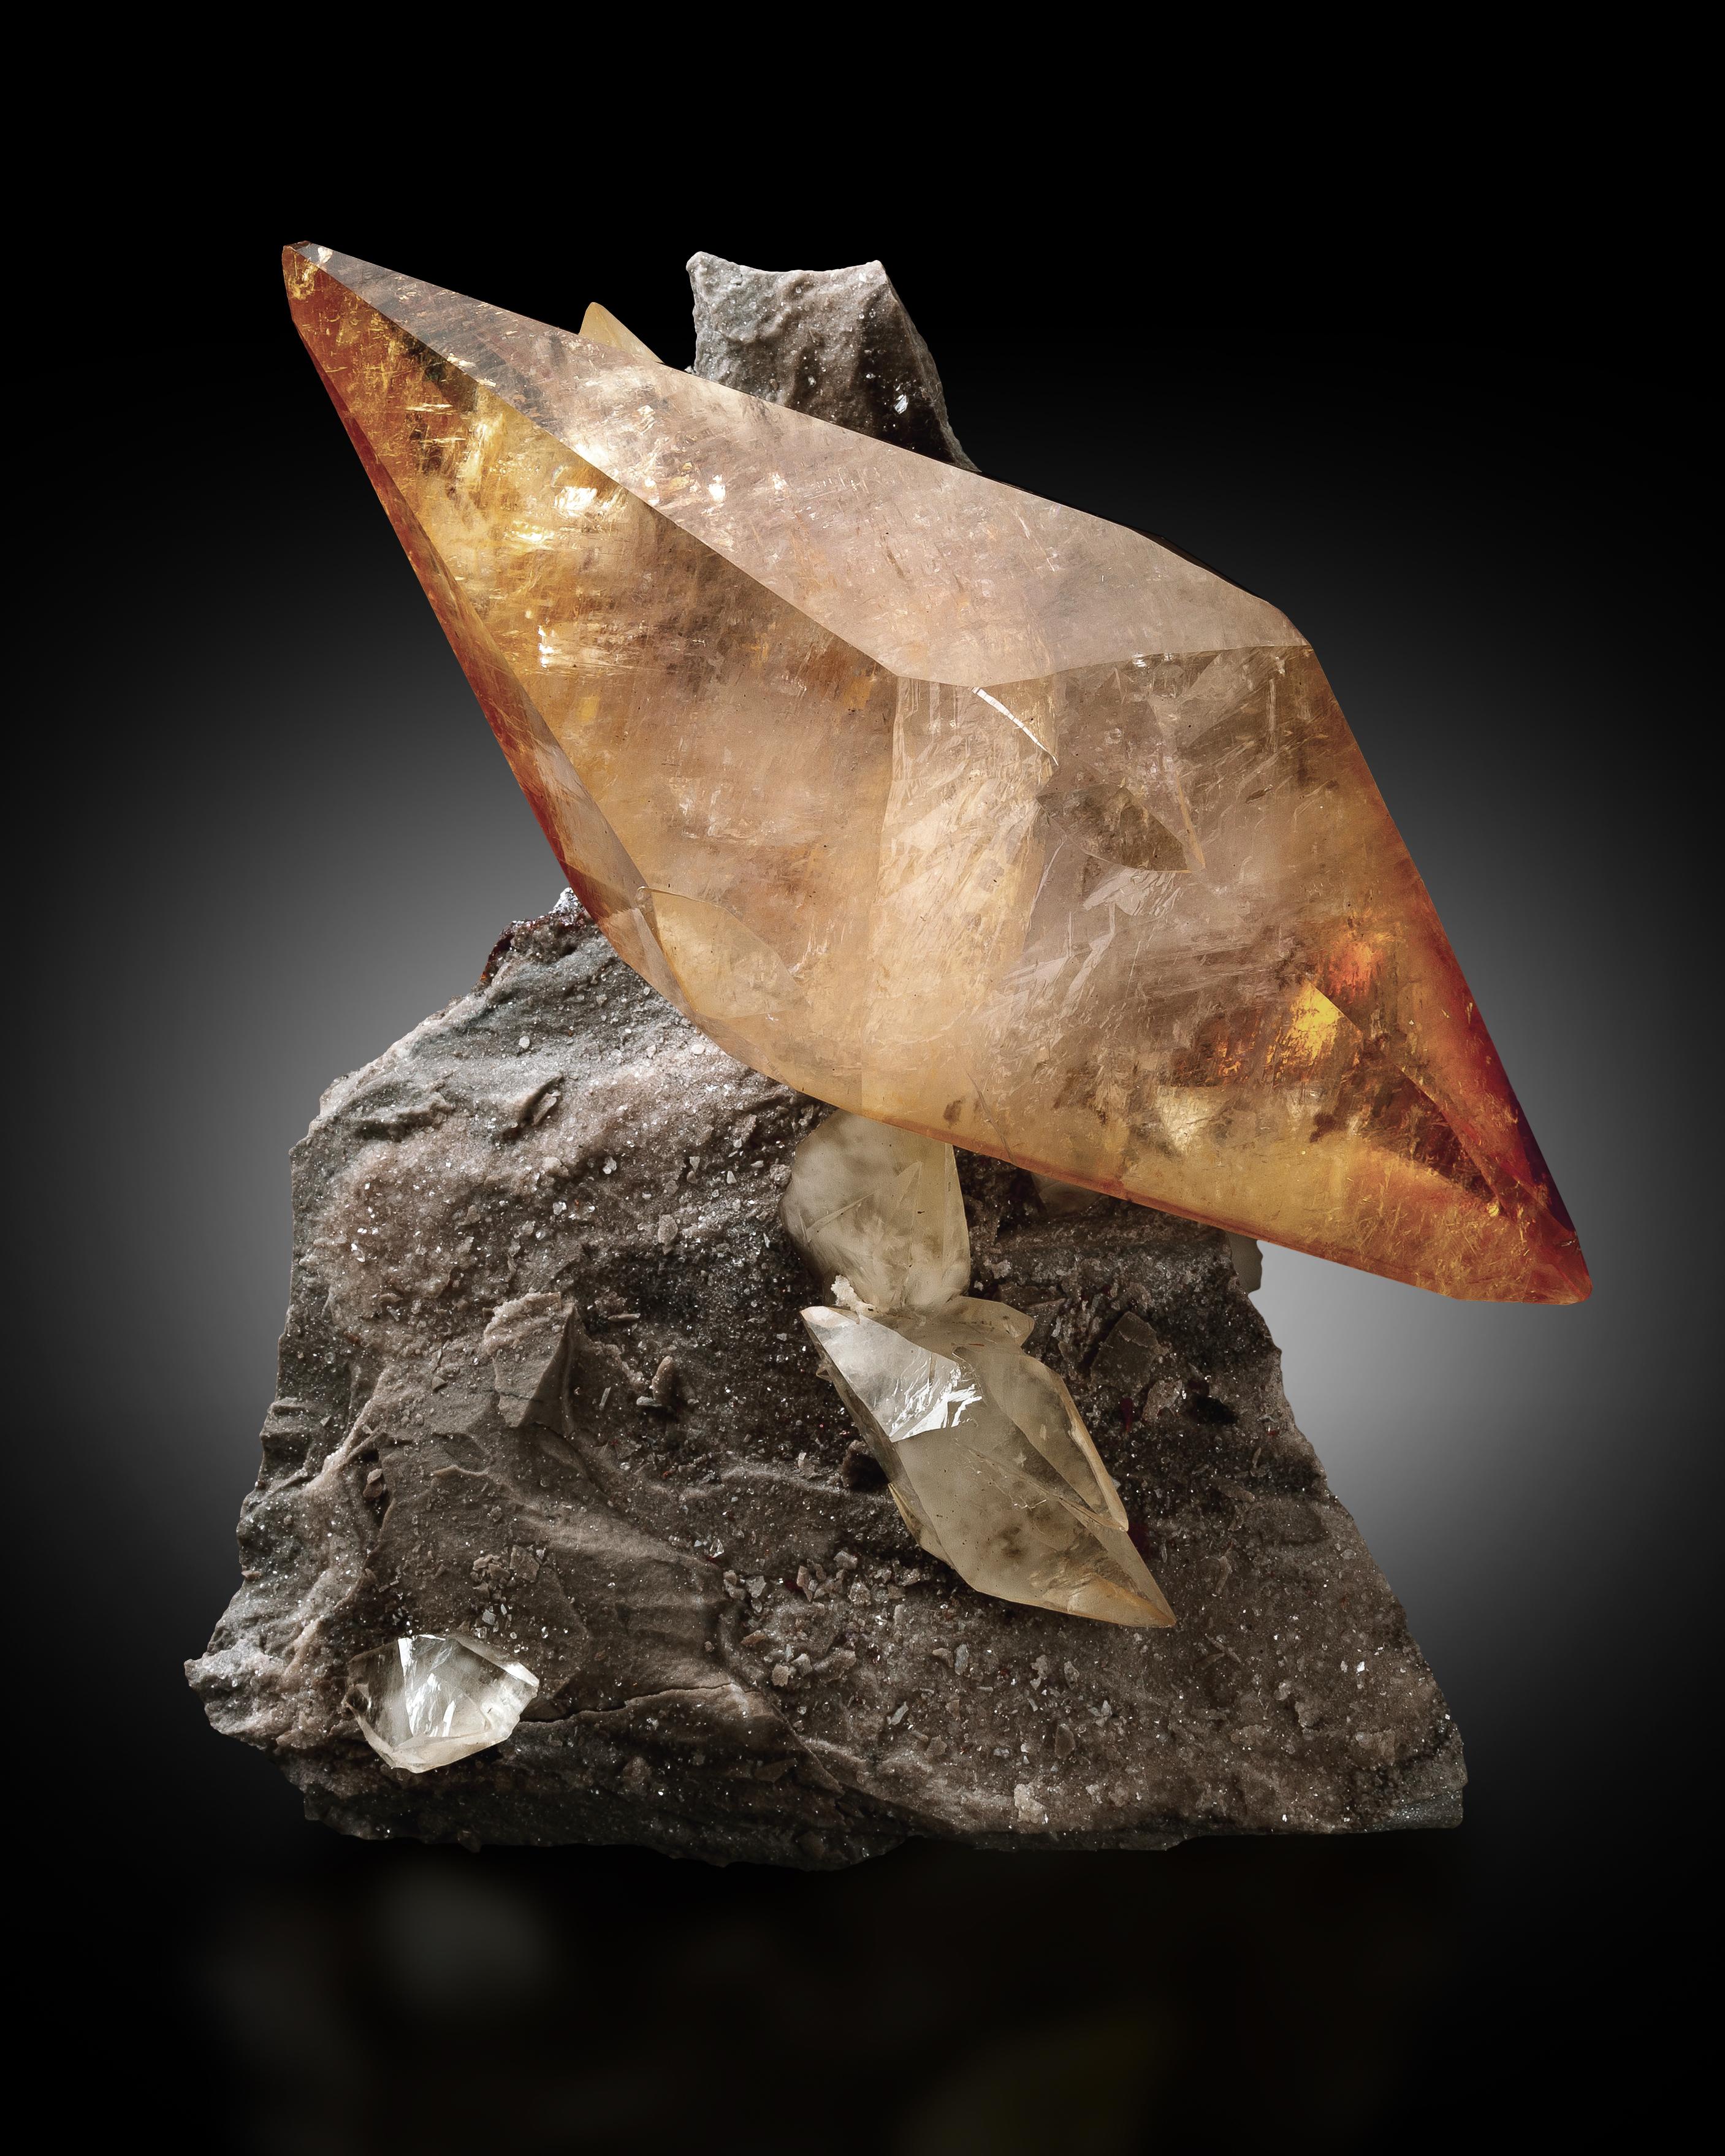 Although calcite is plentiful and diverse, calcite from Tennessee is instantly recognizable and highly sought-after for its twinned, scalenohedral crystal habit. Often, the scalenohedrons are twinned at their base, creating sculptural, doubly